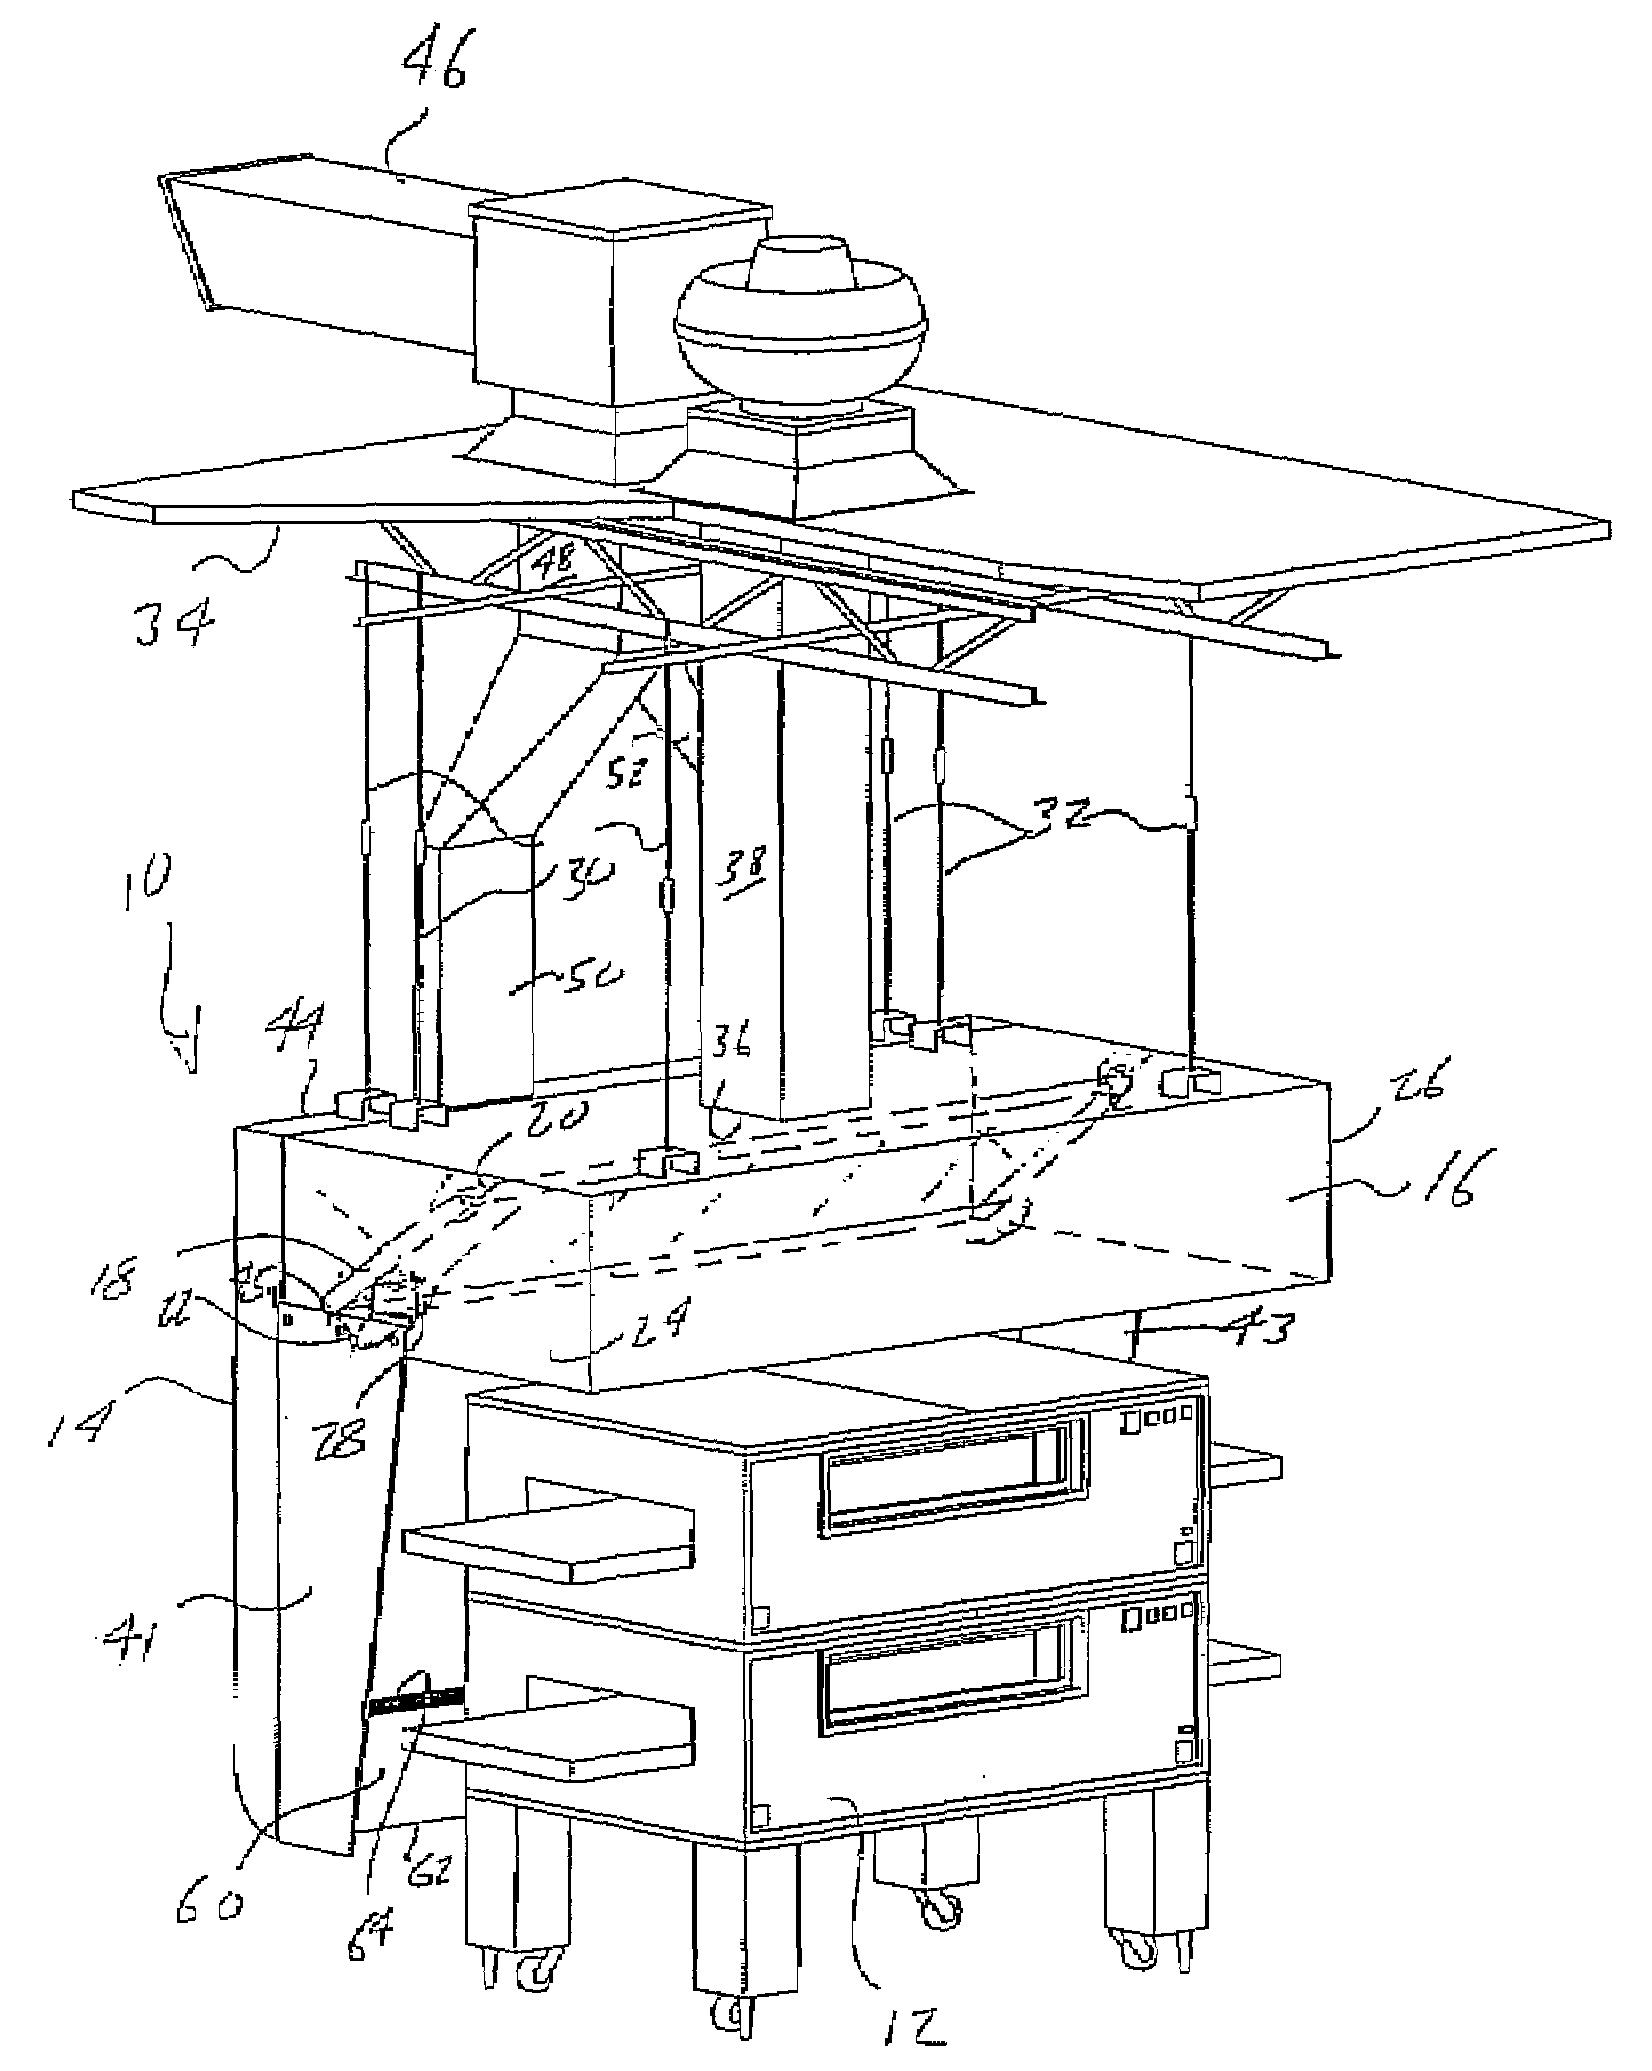 Overhead ventilation system incorporating a downwardly configured rear supply plenum with upward configured and reverse bended directional outlet